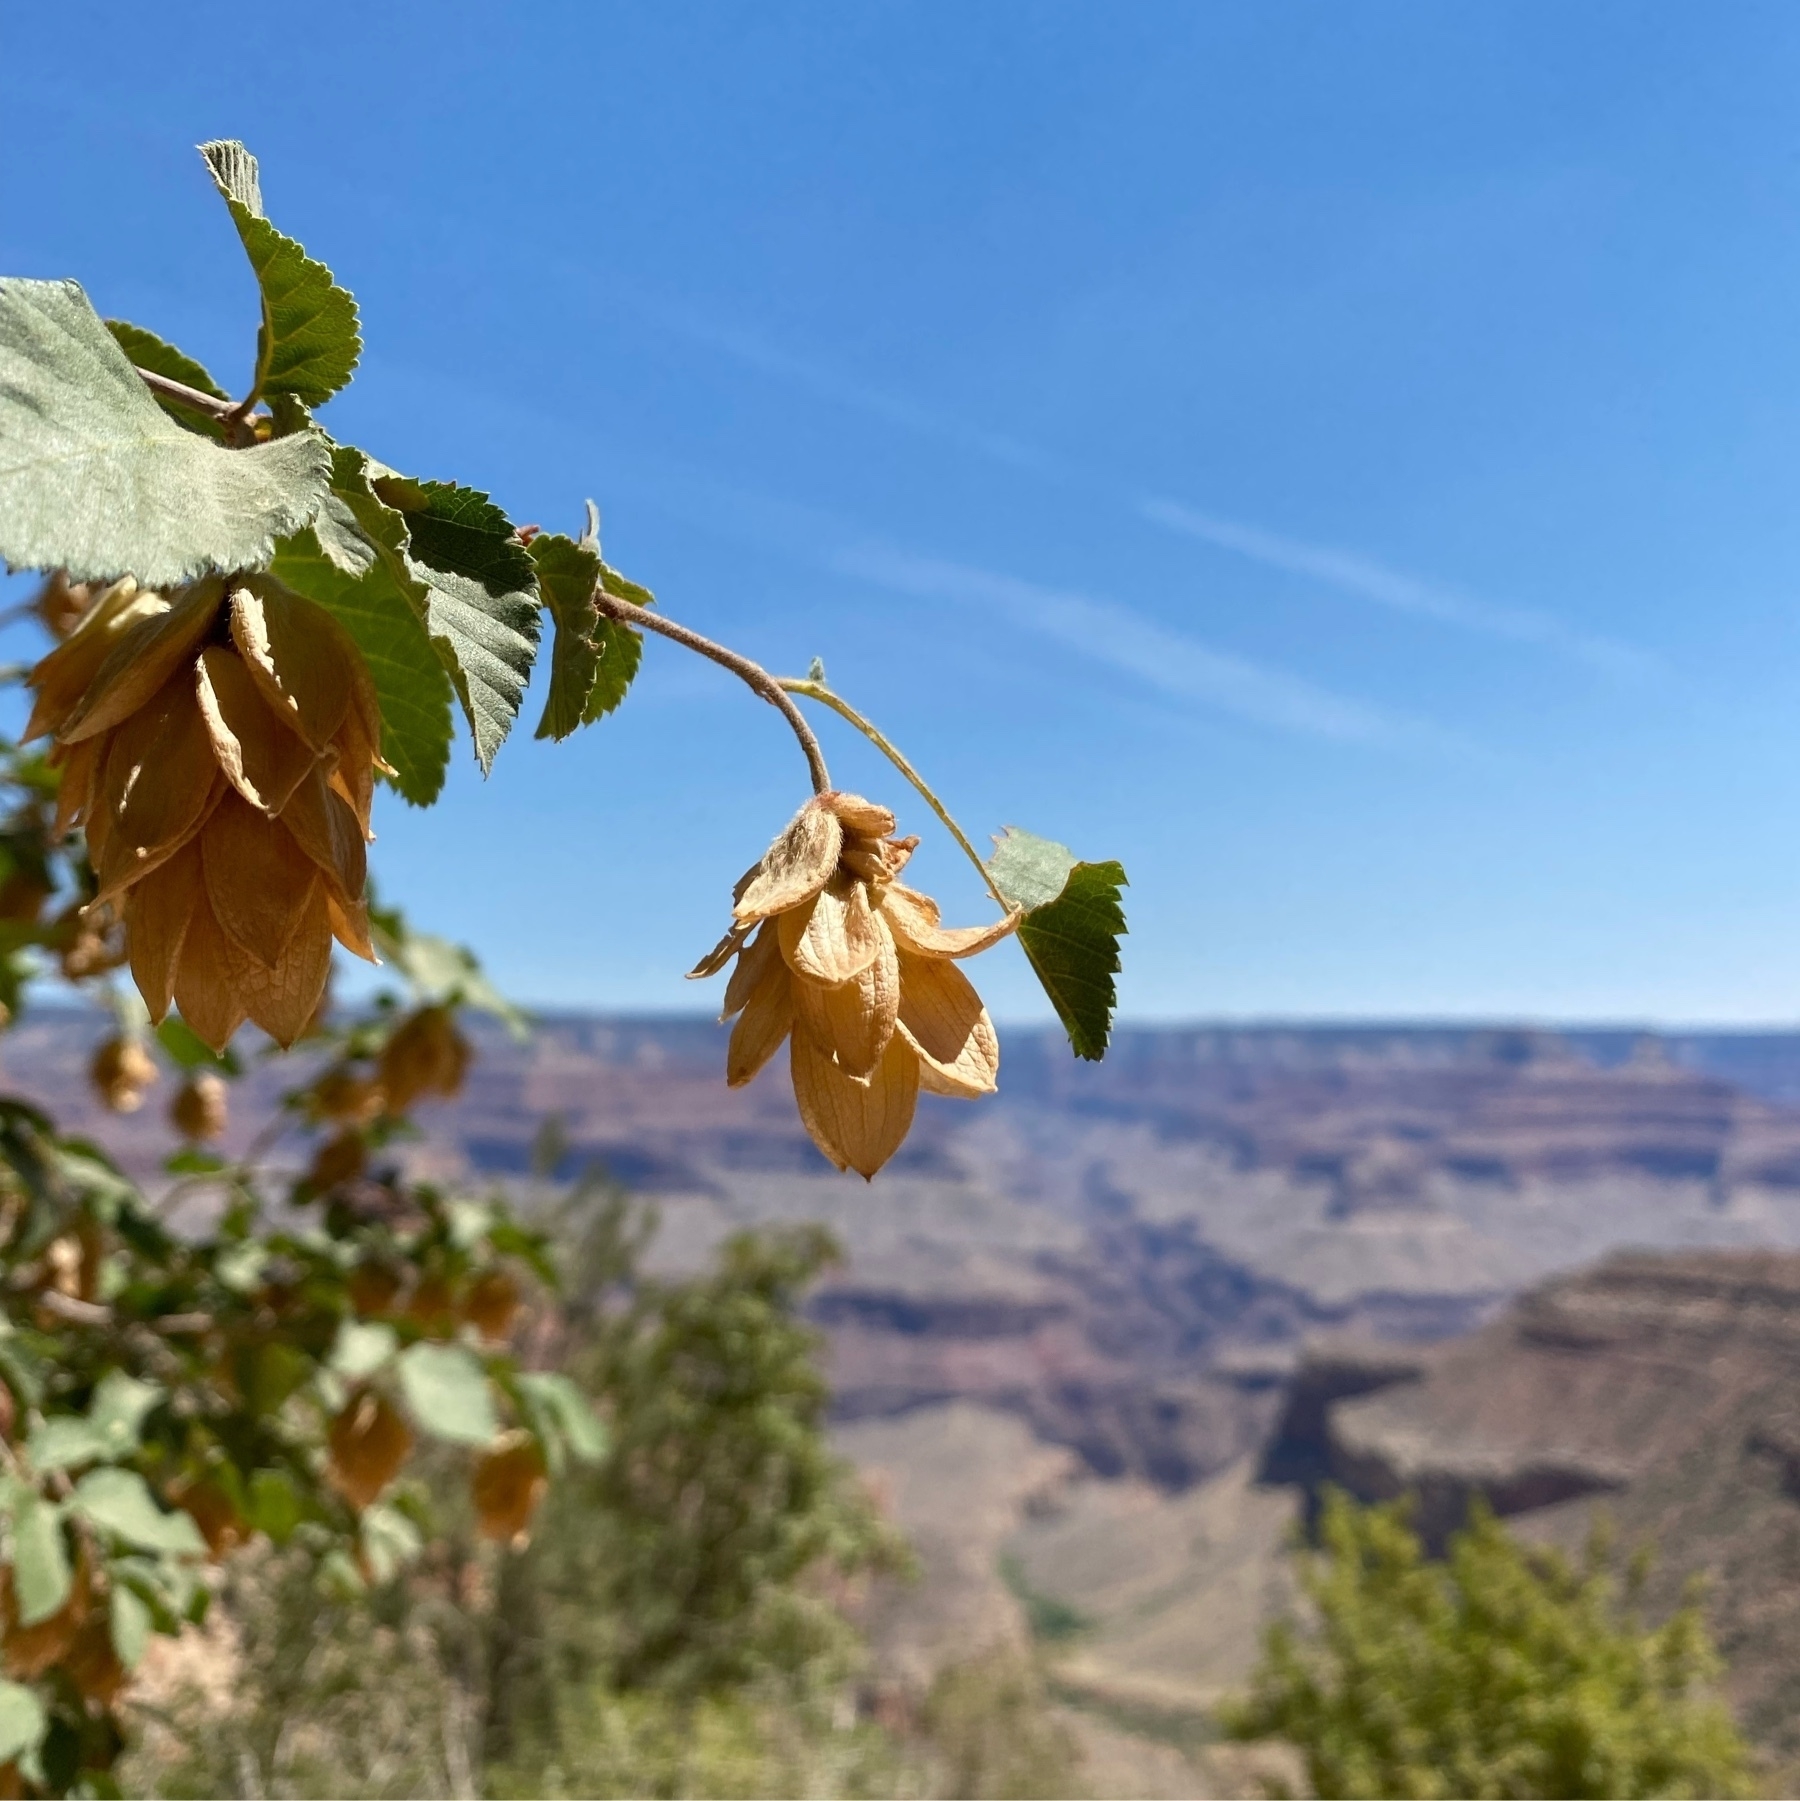 Common hops with a blurred canyon background